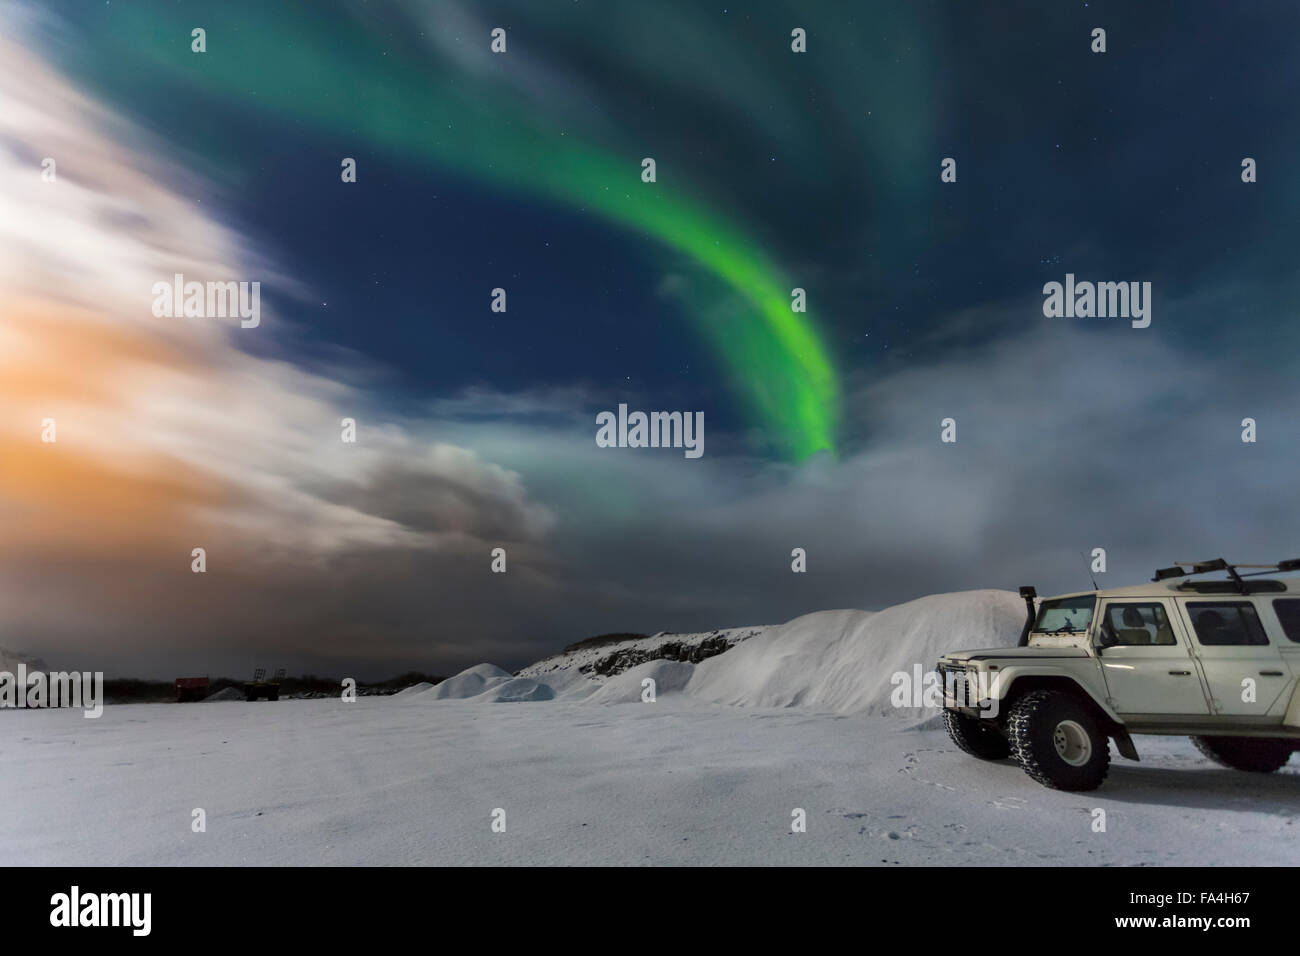 Northern Lights, Aurora Borealis in snowy landscape, 4x4  Aurora chasing tour jeep parked in foreground, Thingvellir, Iceland Stock Photo